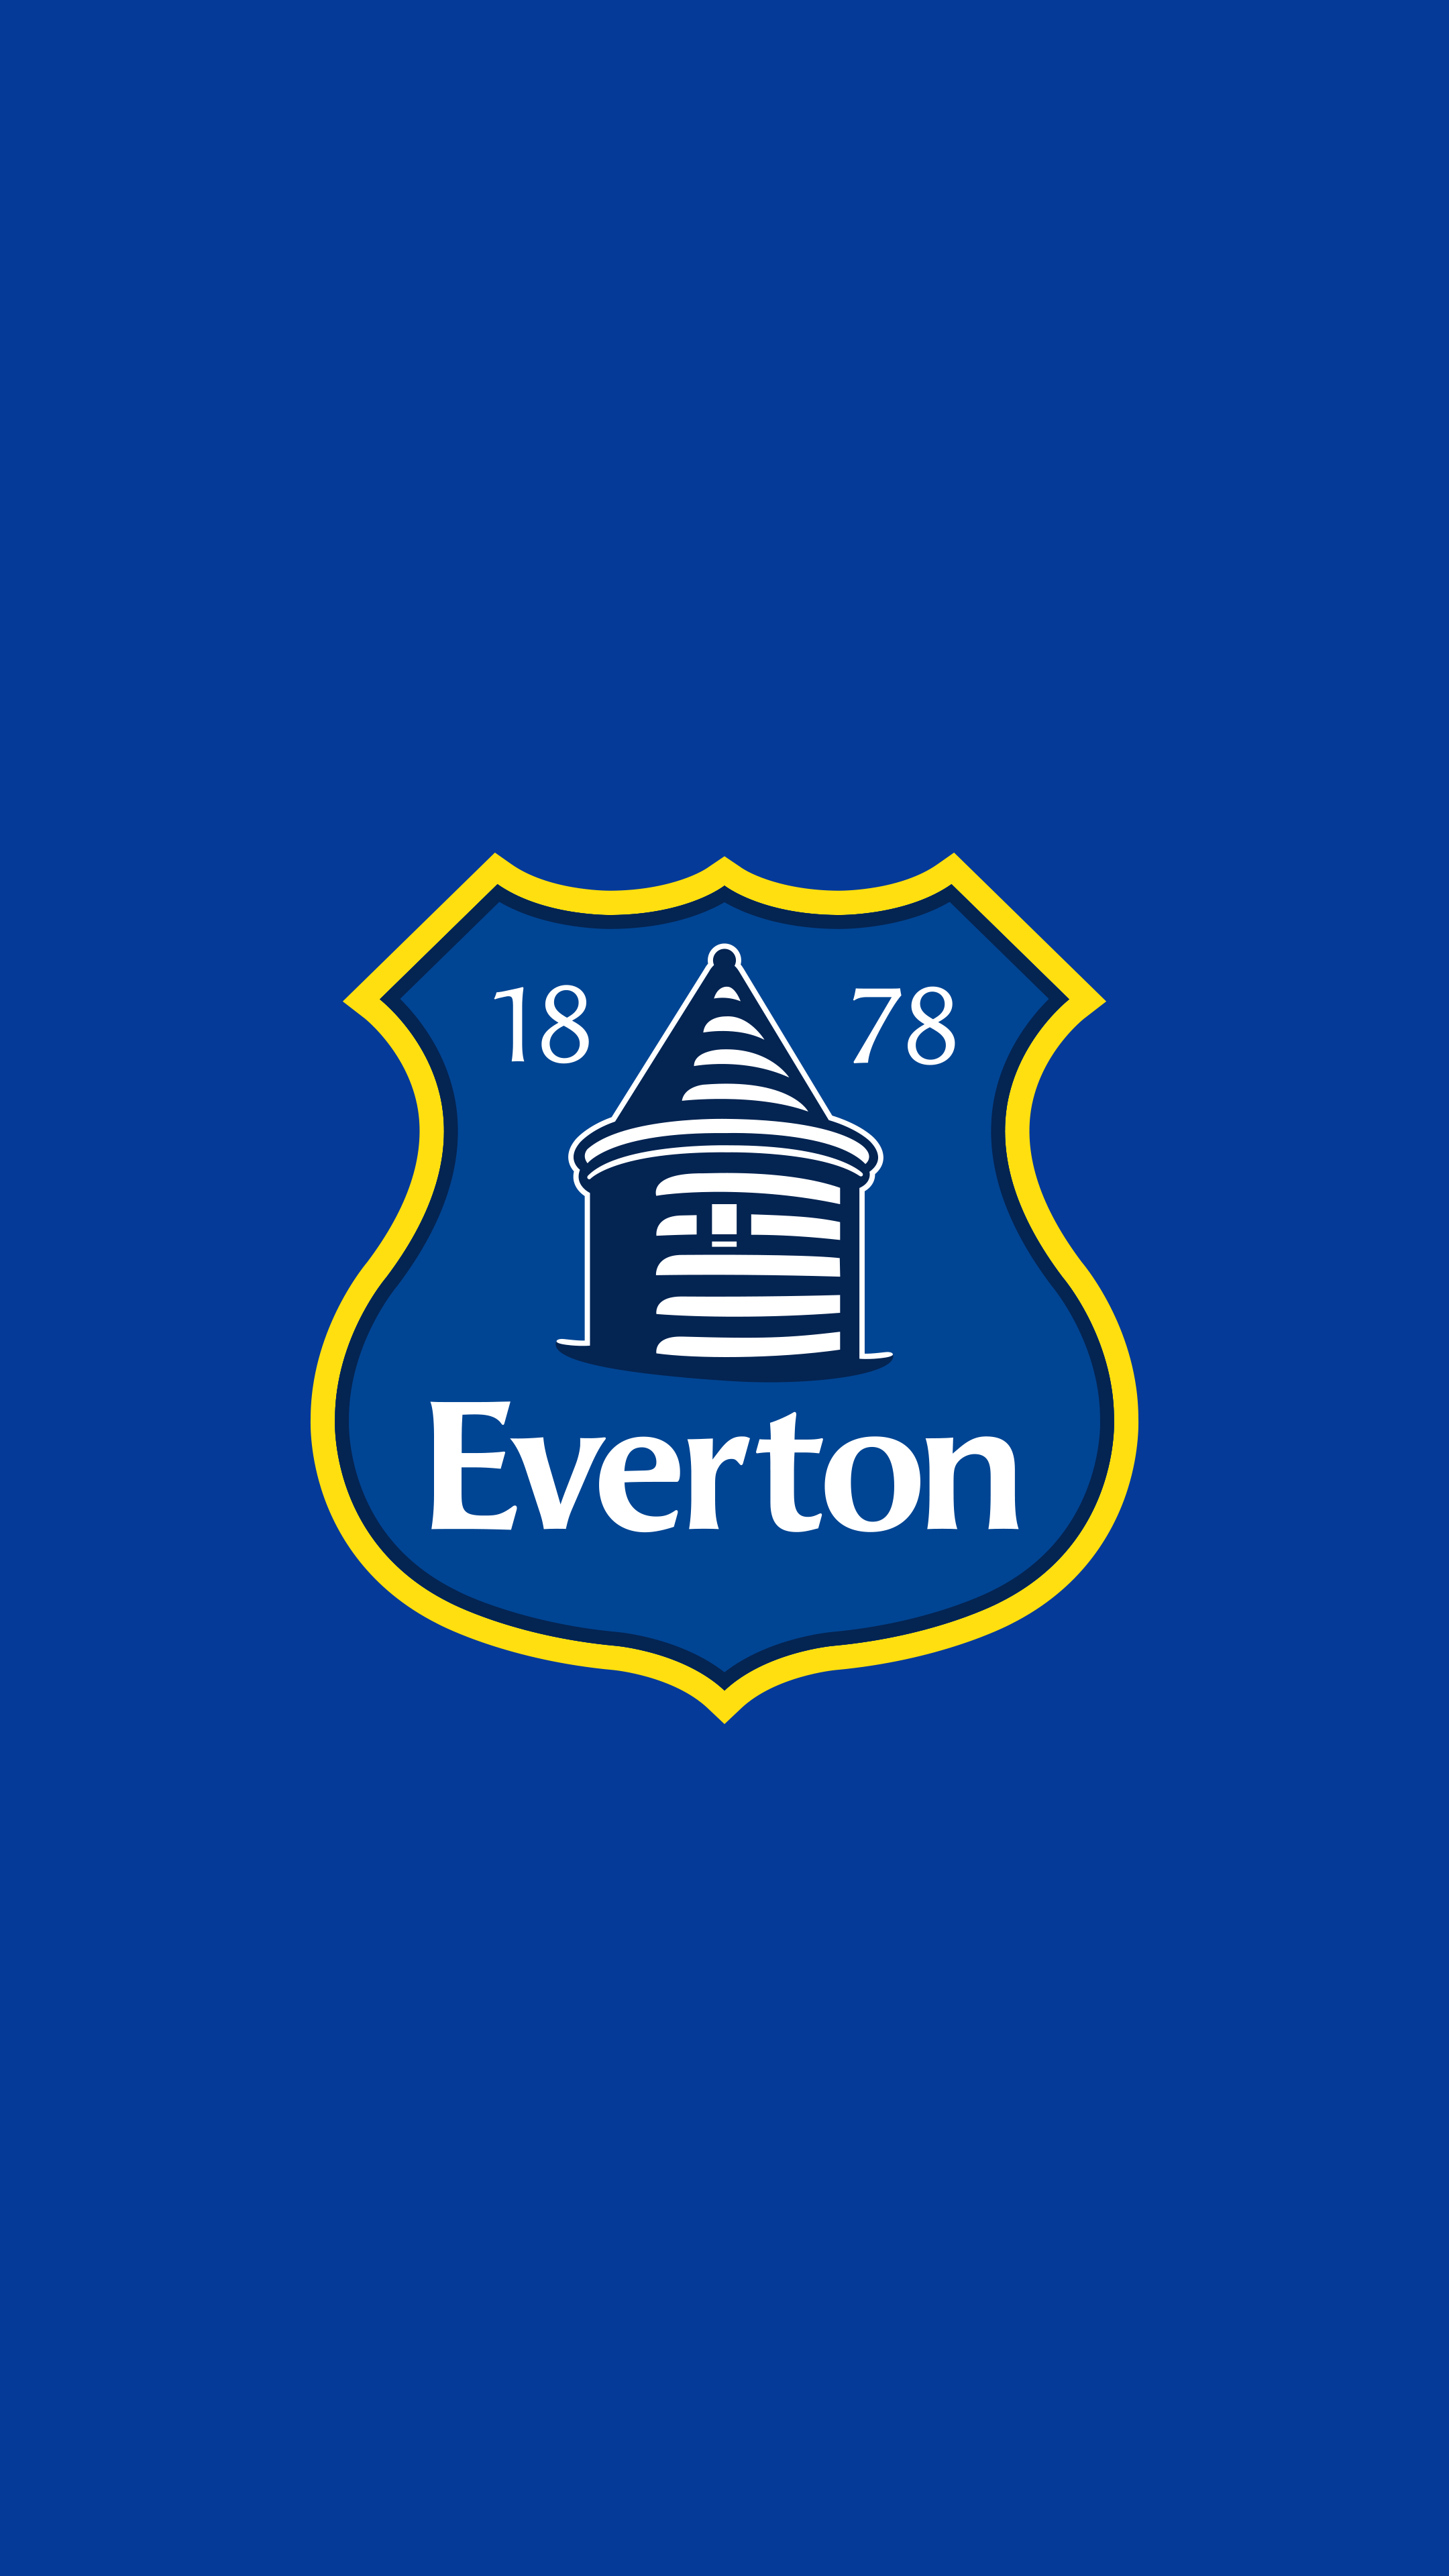 All 11 Everton Crests